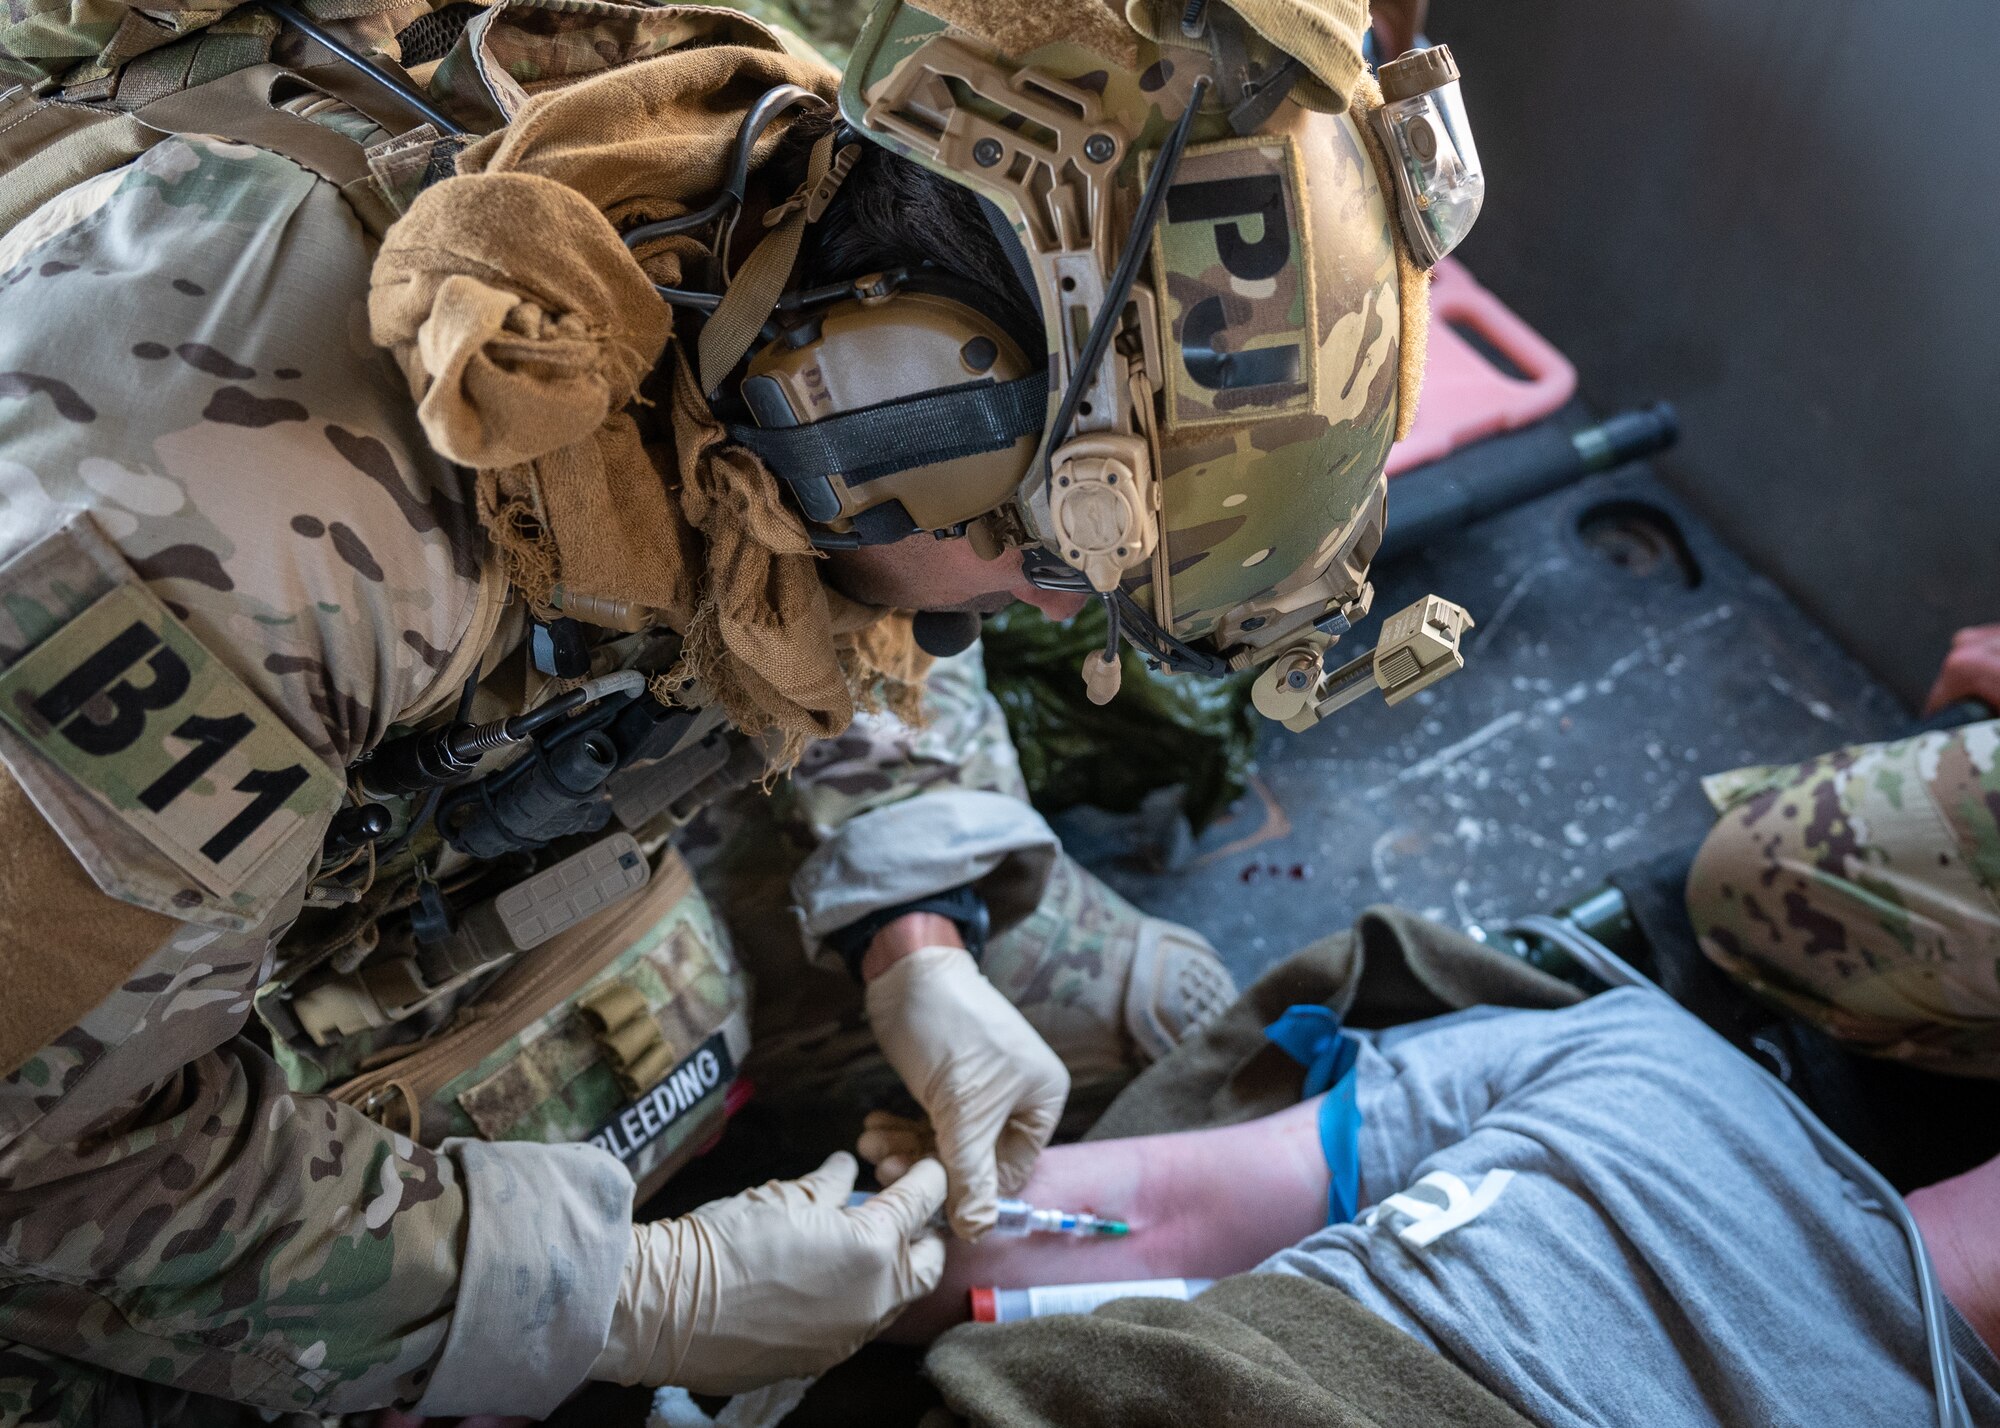 A Pararescue Specialist with the 52nd Expeditionary Rescue Squadron inserts an IV catheter into a simulated injured patient while inside an HH-60G Pave Hawk helicopter at an undisclosed location in Southwest Asia, March 13, 2023.